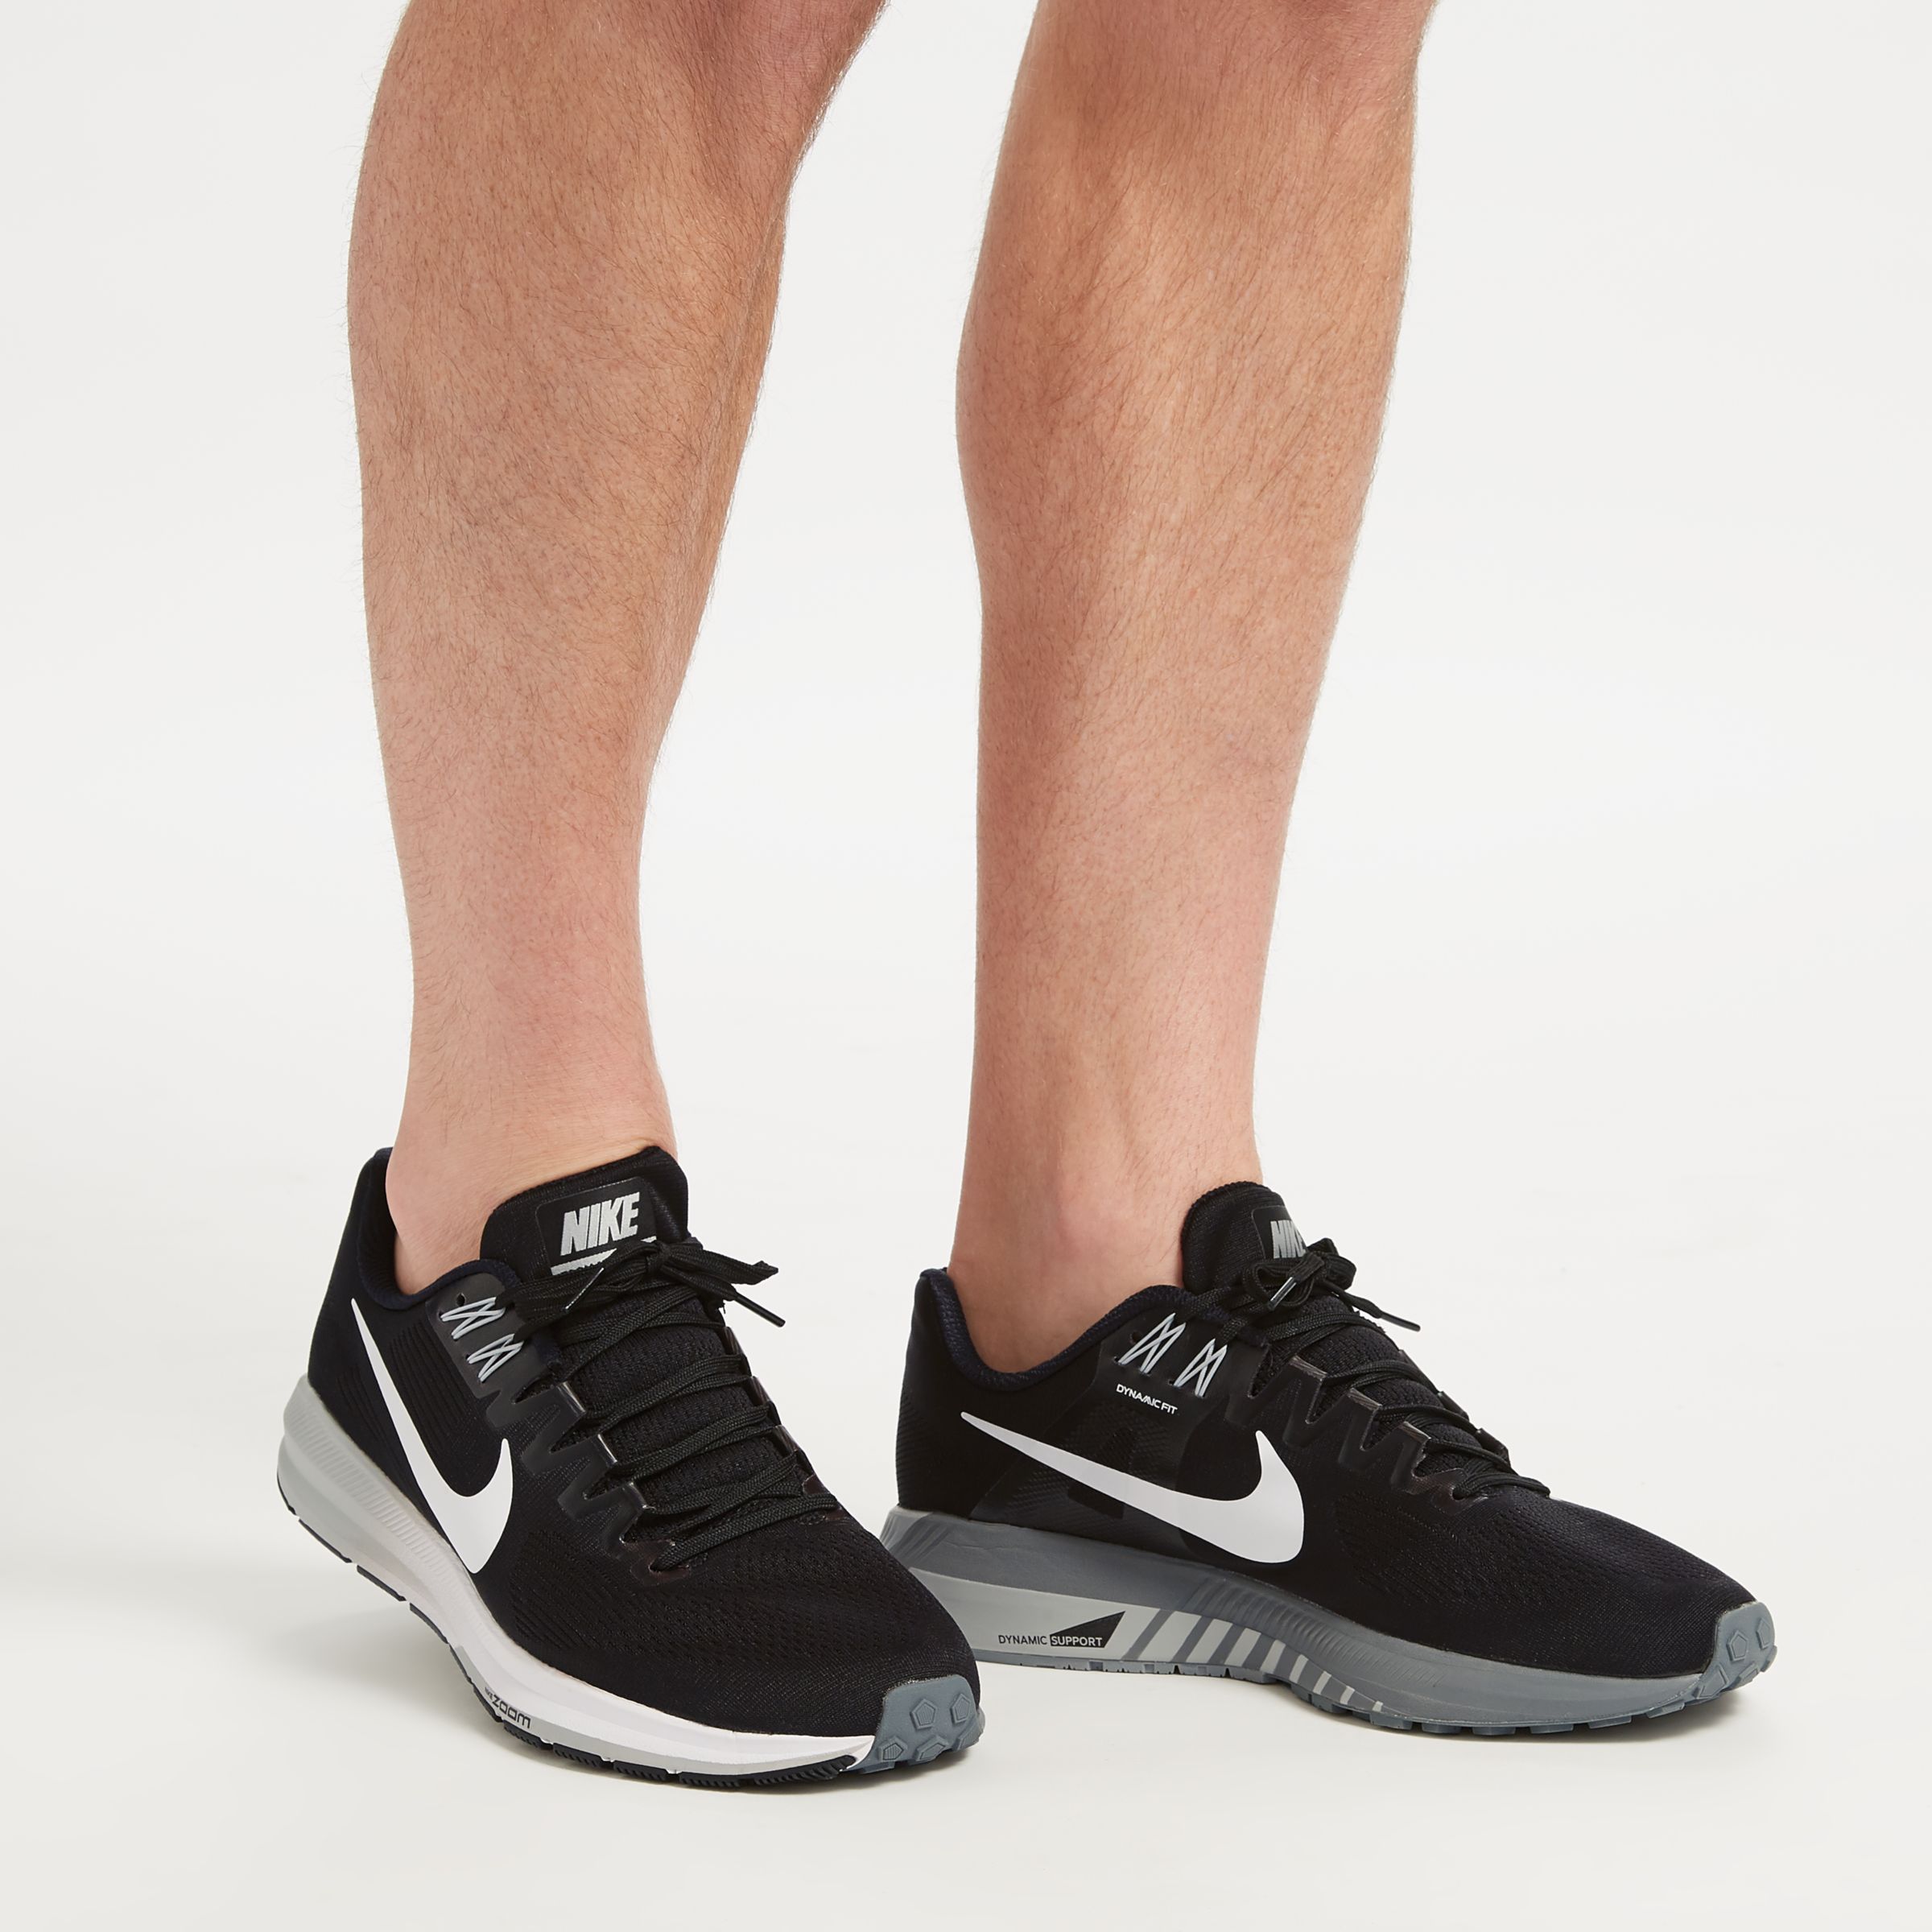 nike zoom structure 21 price in india